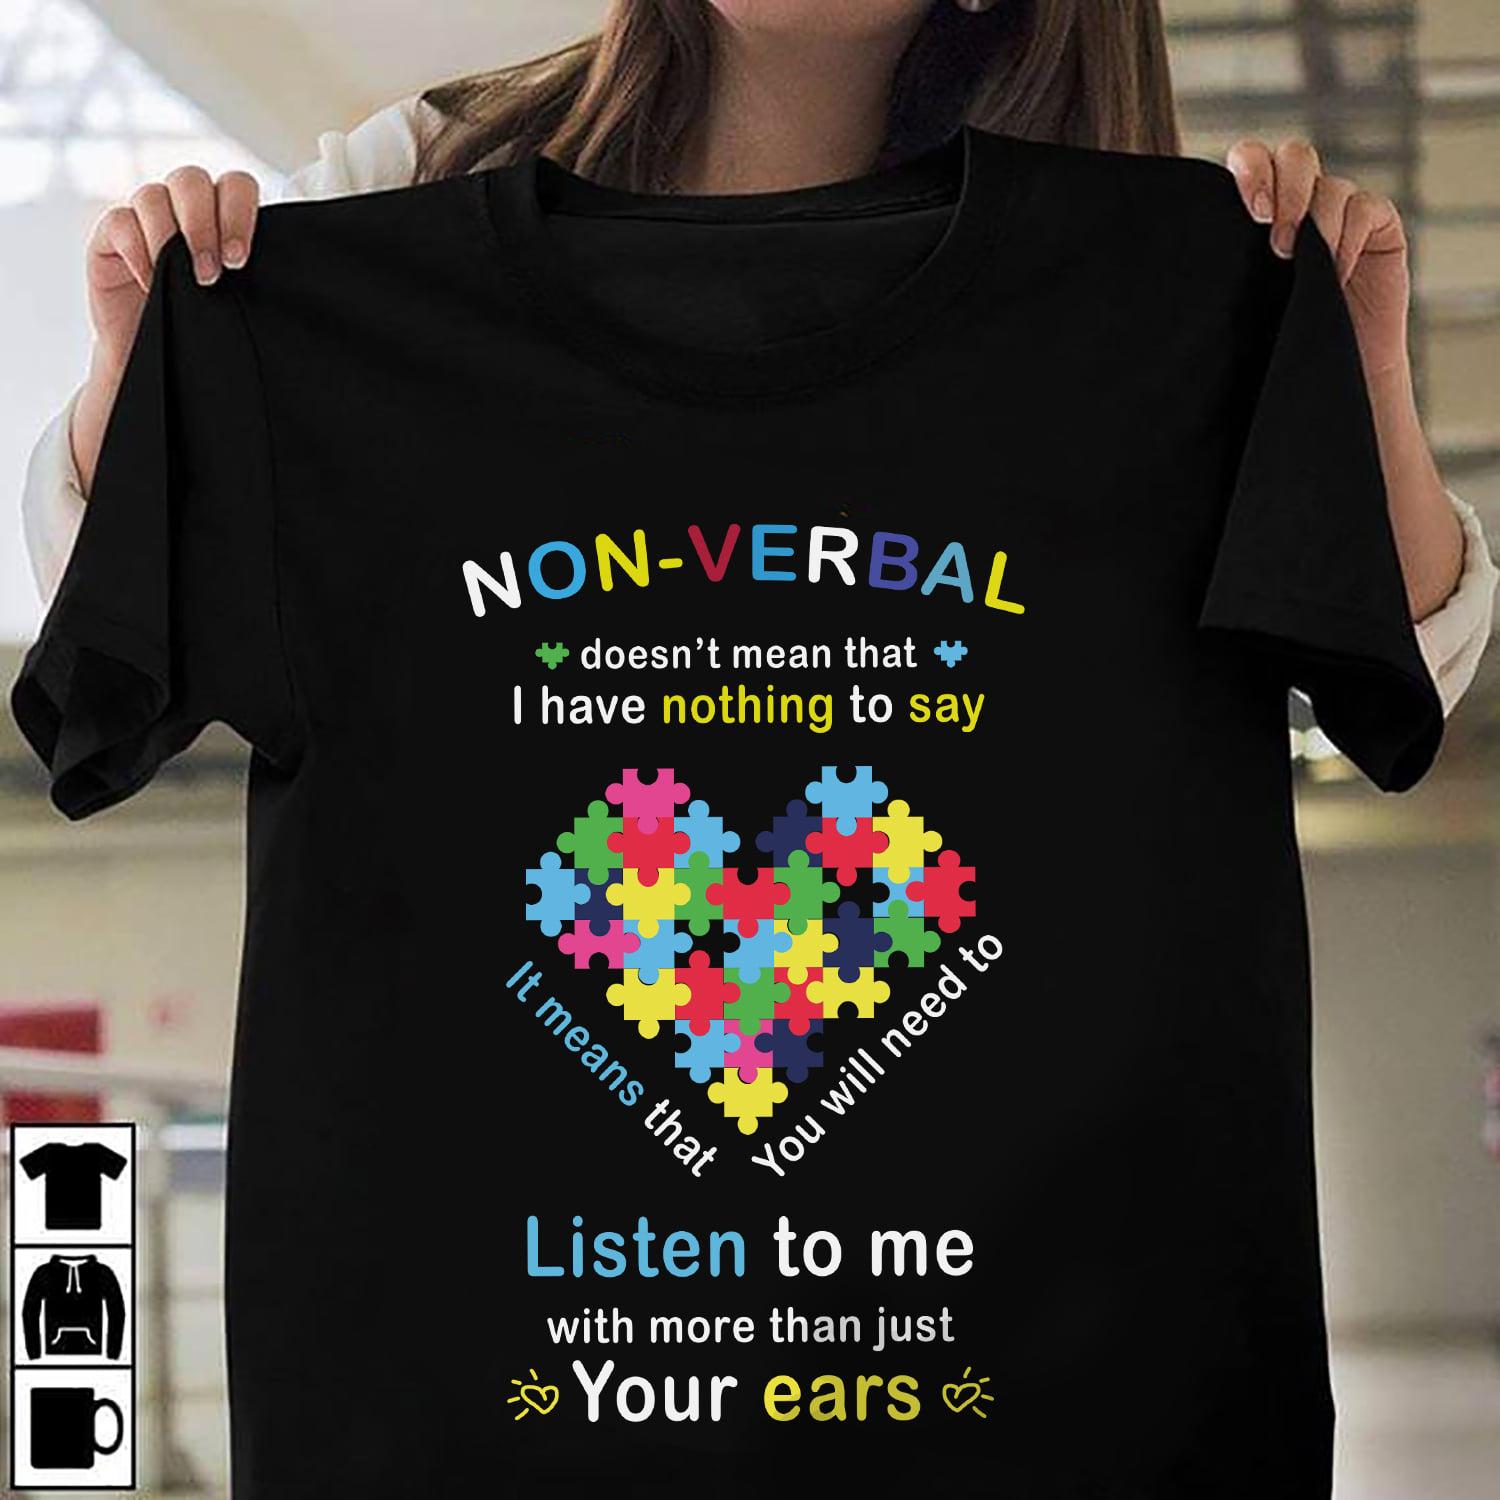 Non-verbal doesn't mean that I have nothing to say - Autism awareness, autism puzzle symbol